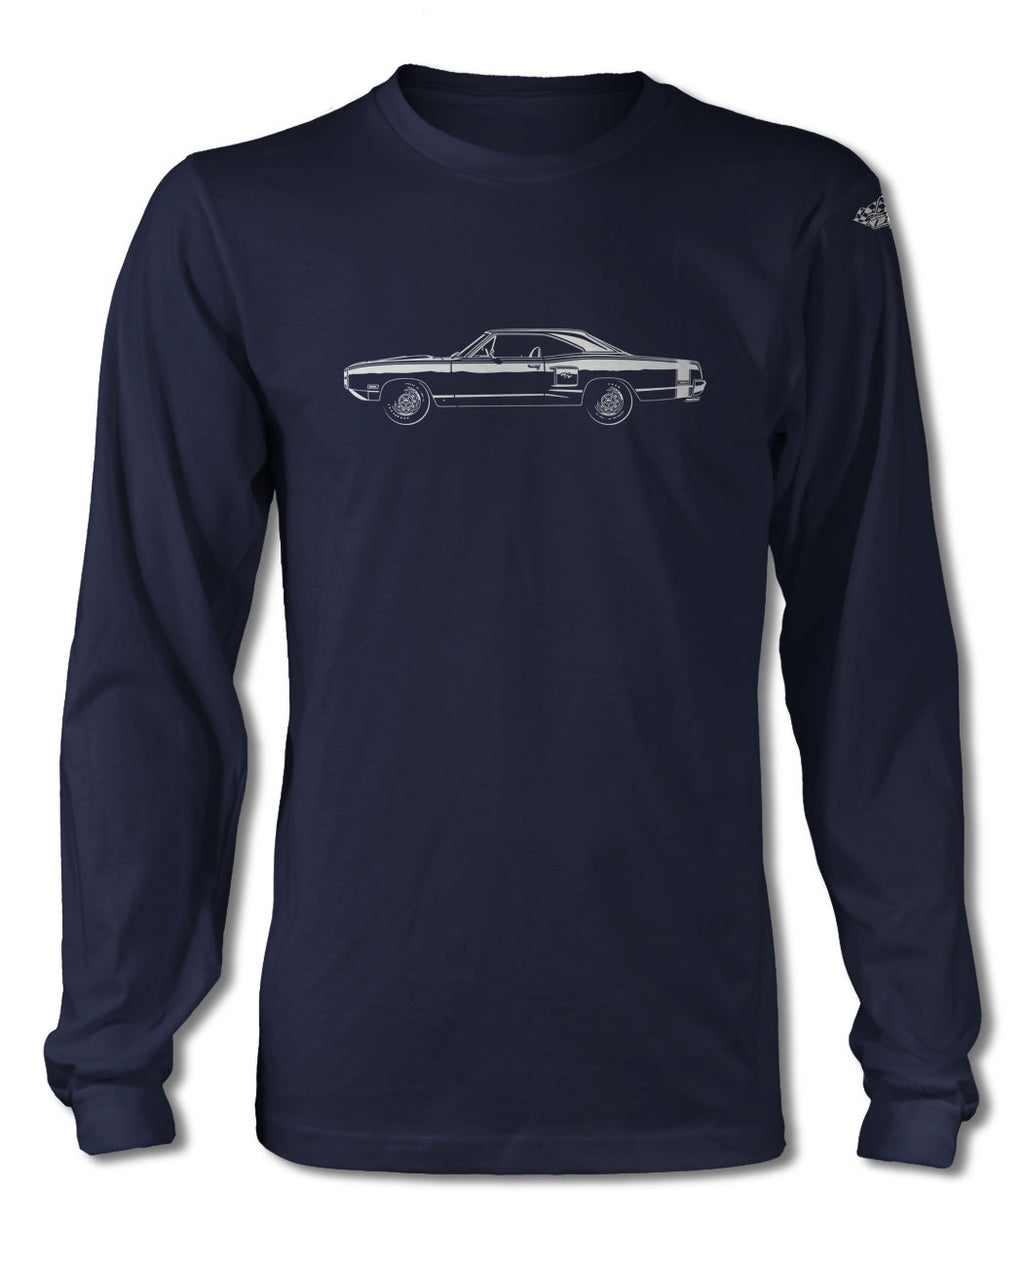 1970 Dodge Coronet RT with Stripes Hardtop T-Shirt - Long Sleeves - Side View